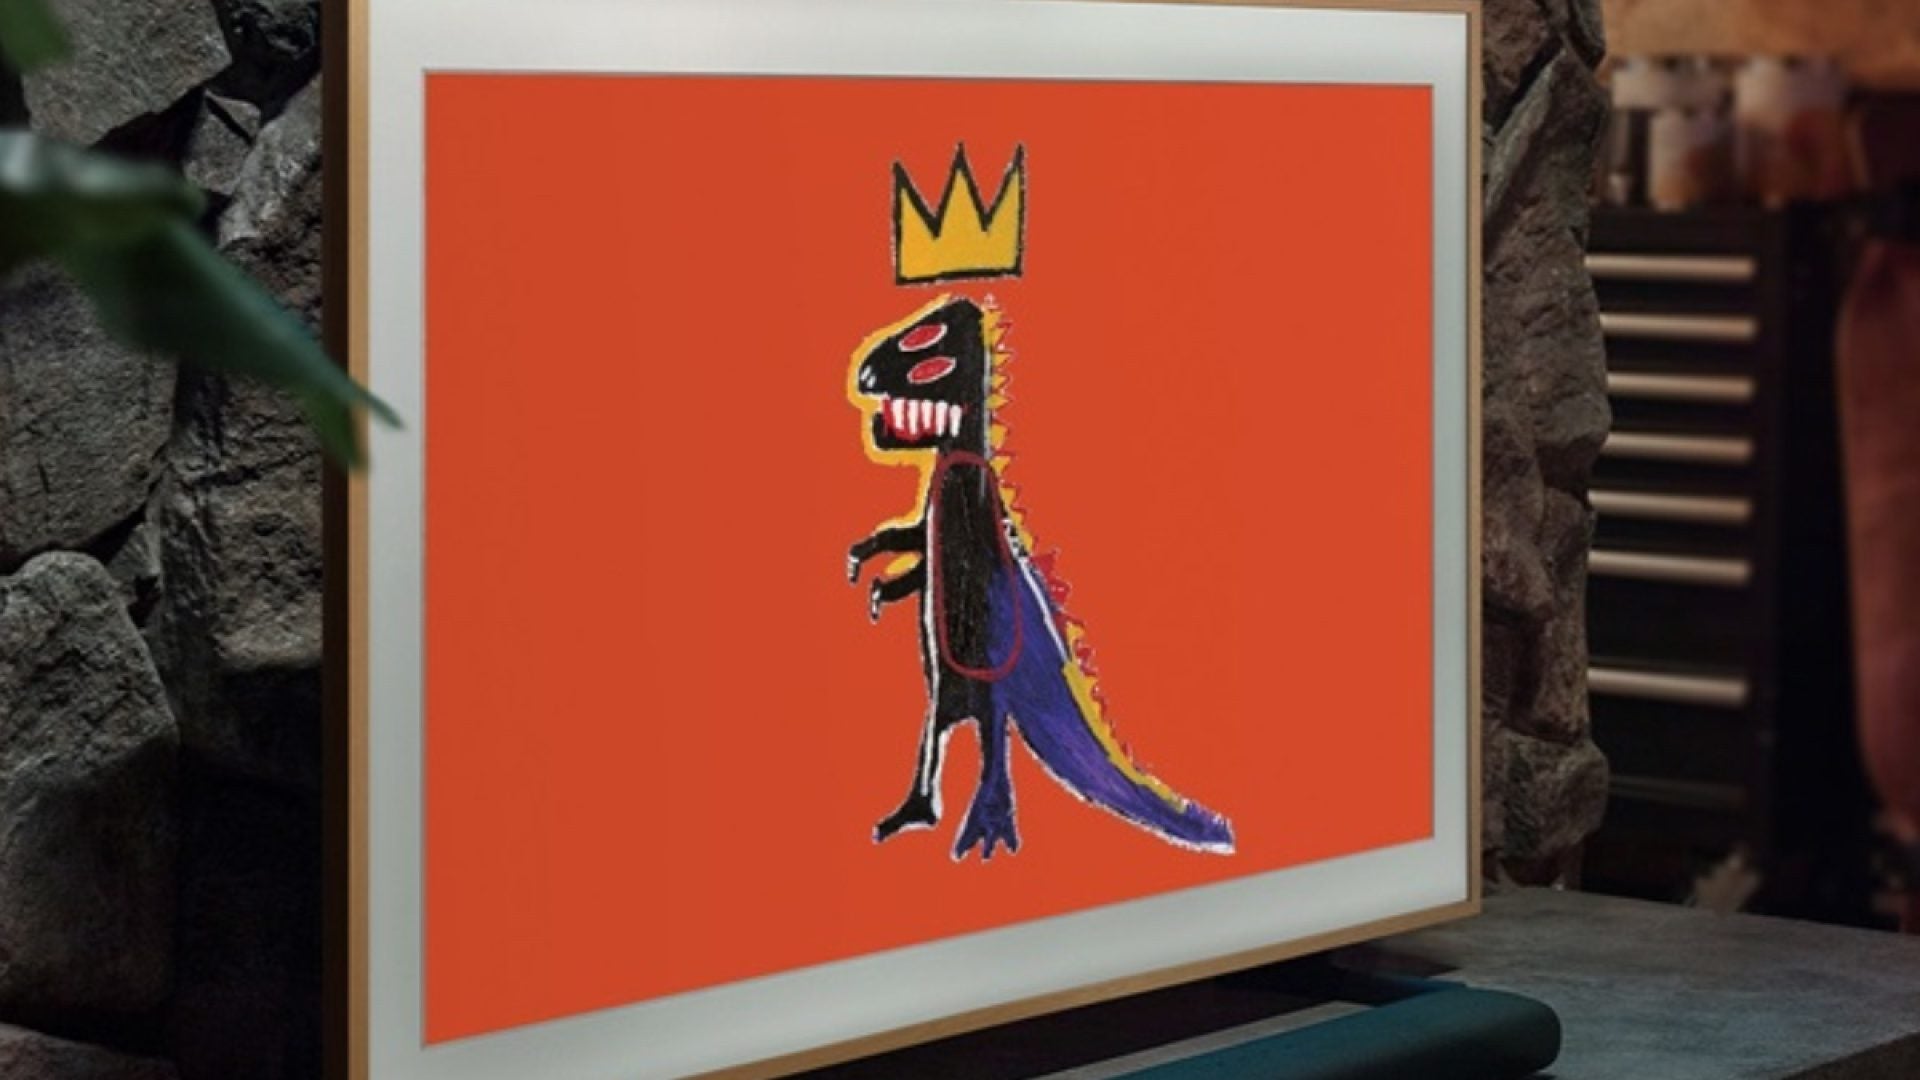 You Can Hang A Basquiat In Your Home For Under $10 A Month